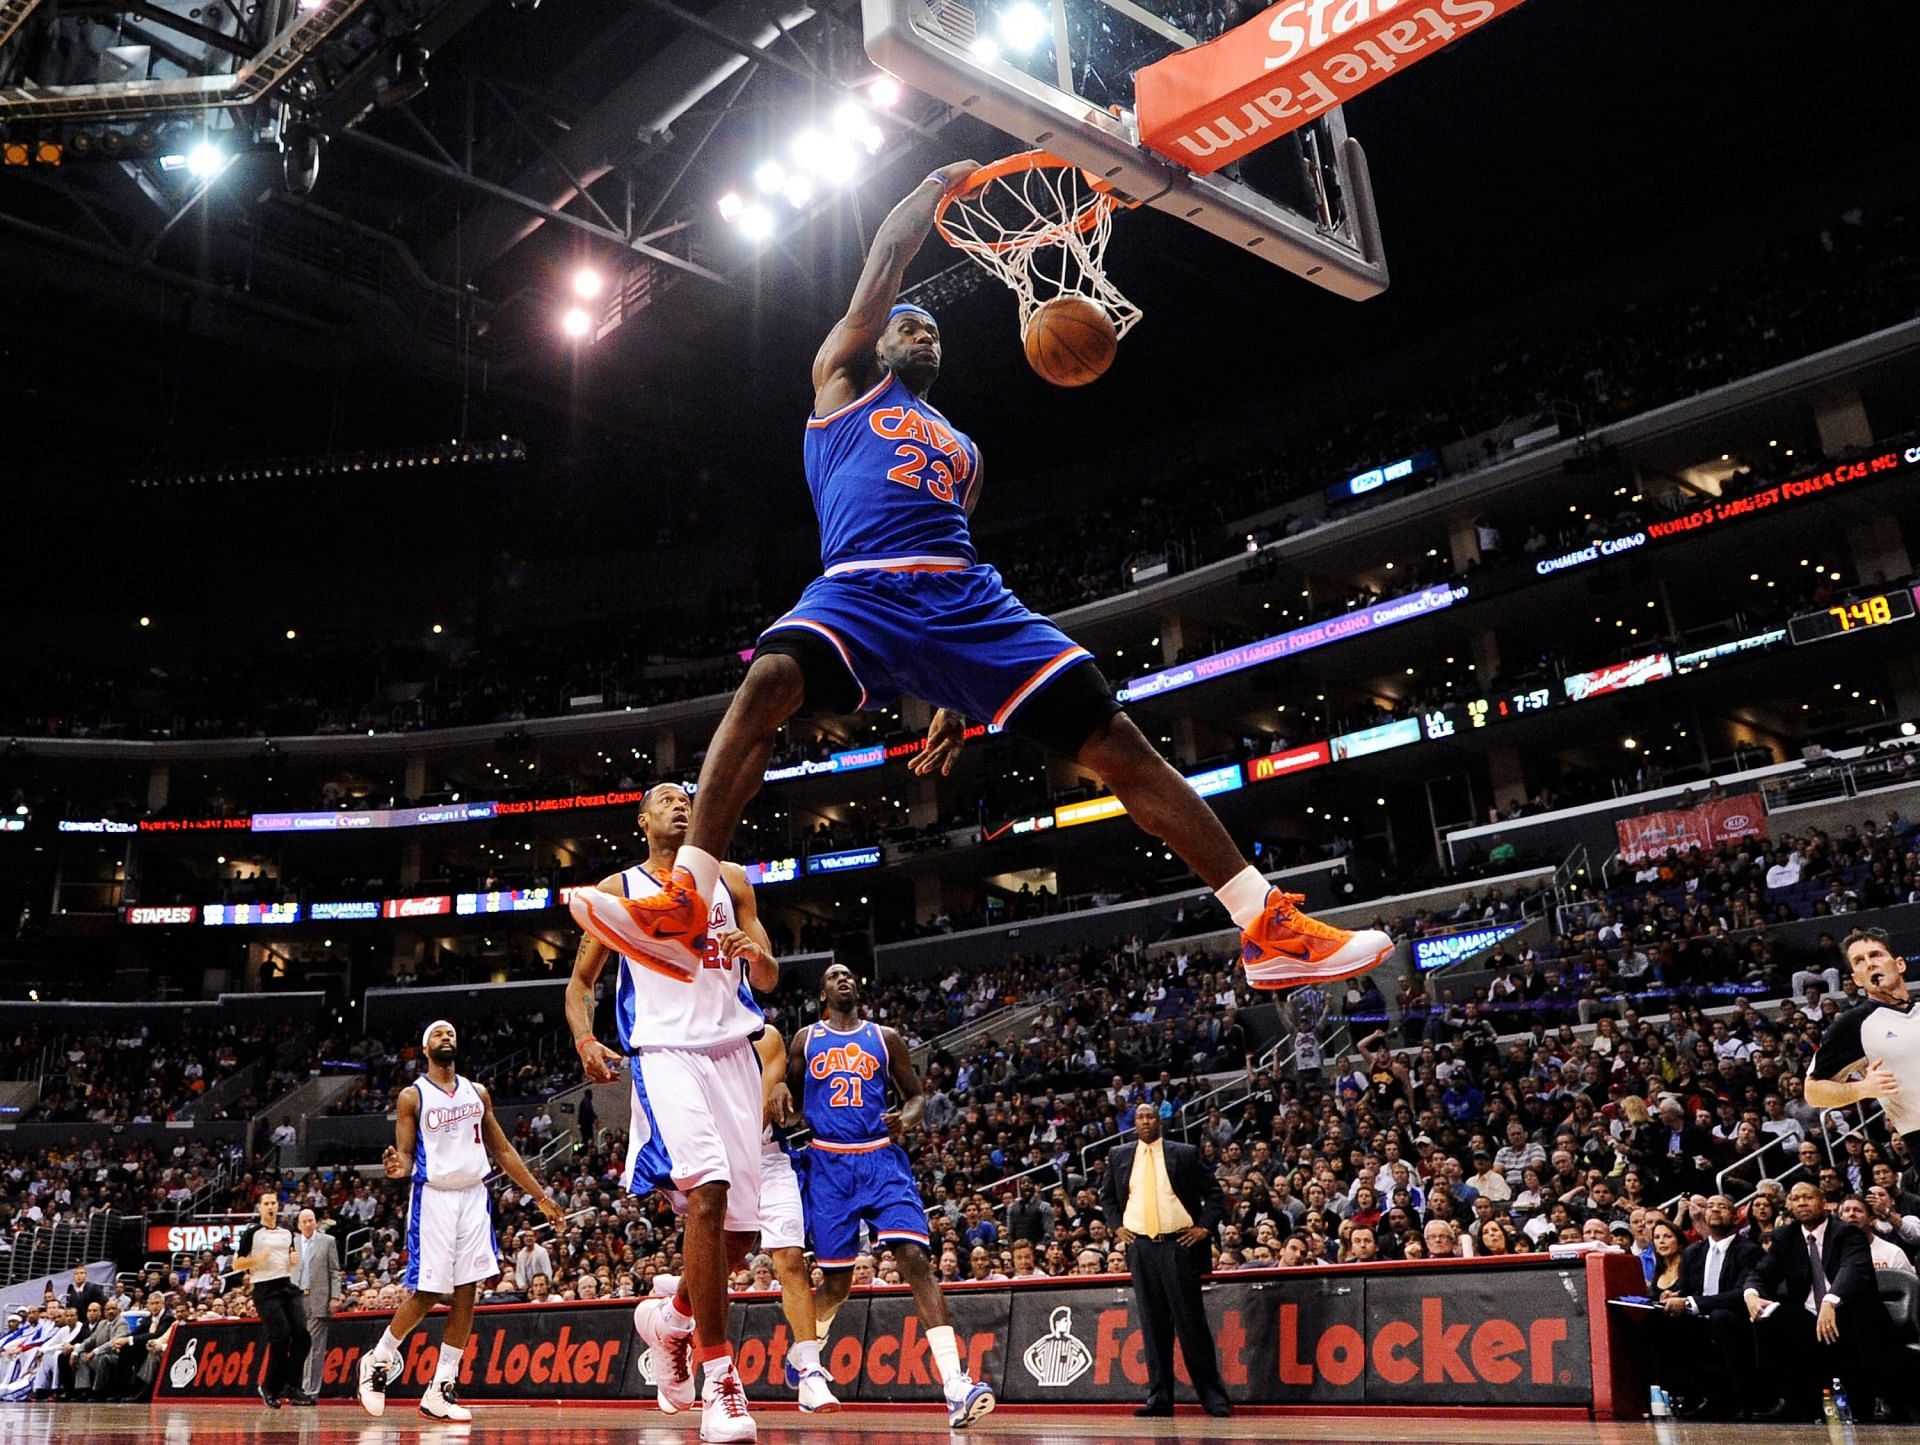 LeBron James dunks the ball against the Los Angeles Clippers.